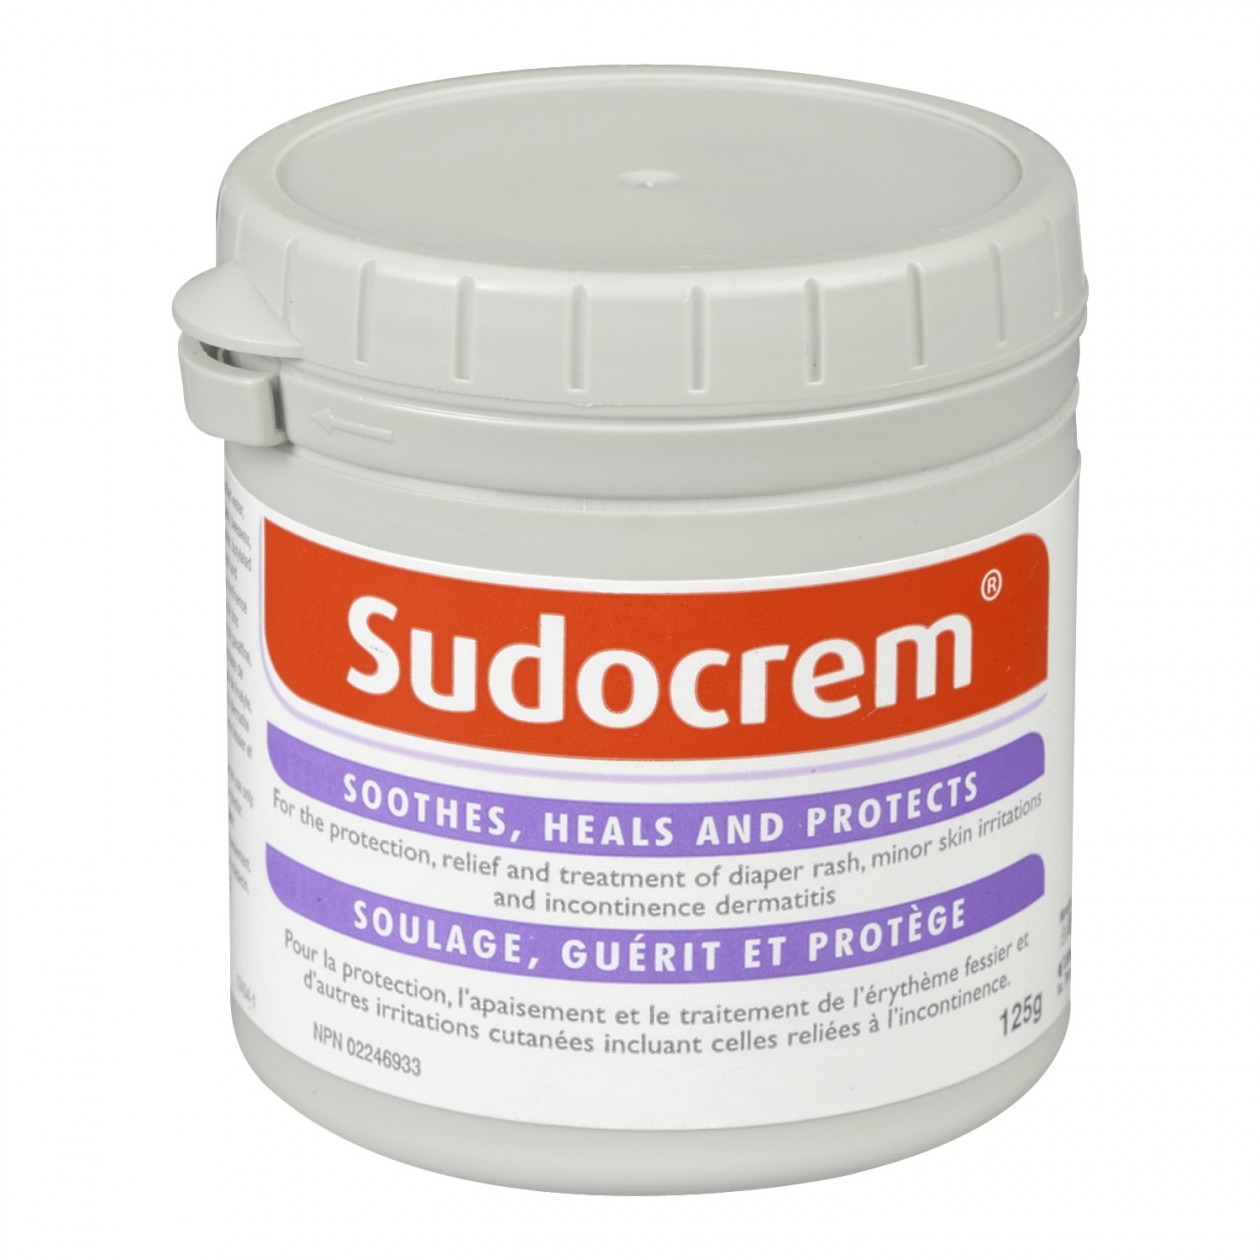 Sudocrem Diaper Rash Cream - Soothes, Heals and Protects 125g